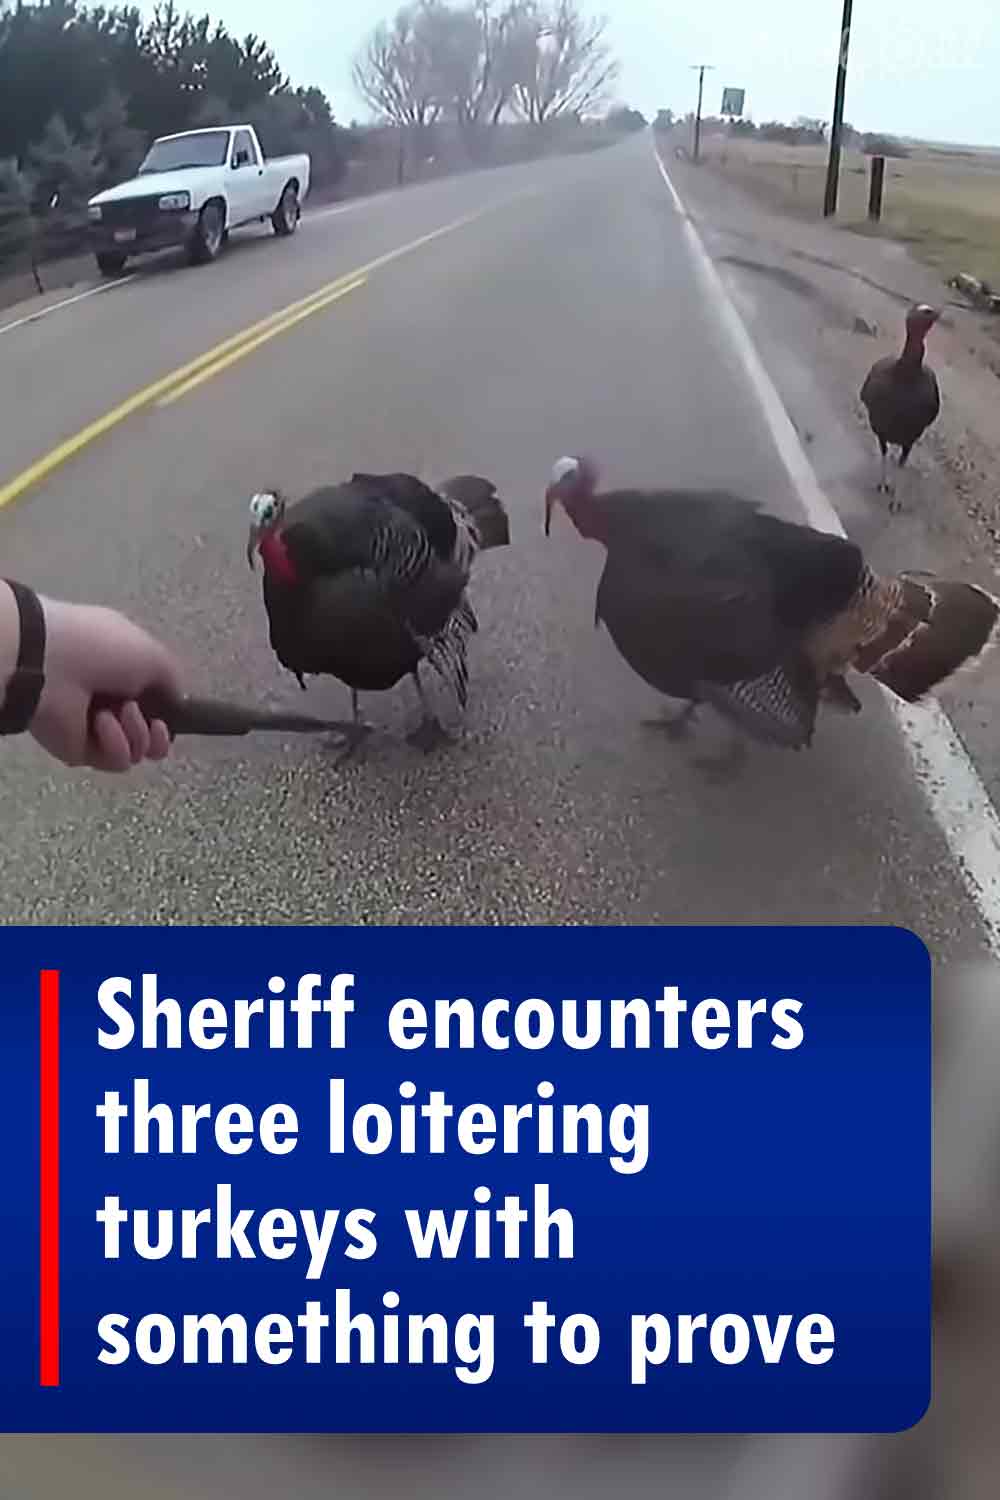 Sheriff encounters three loitering turkeys with something to prove